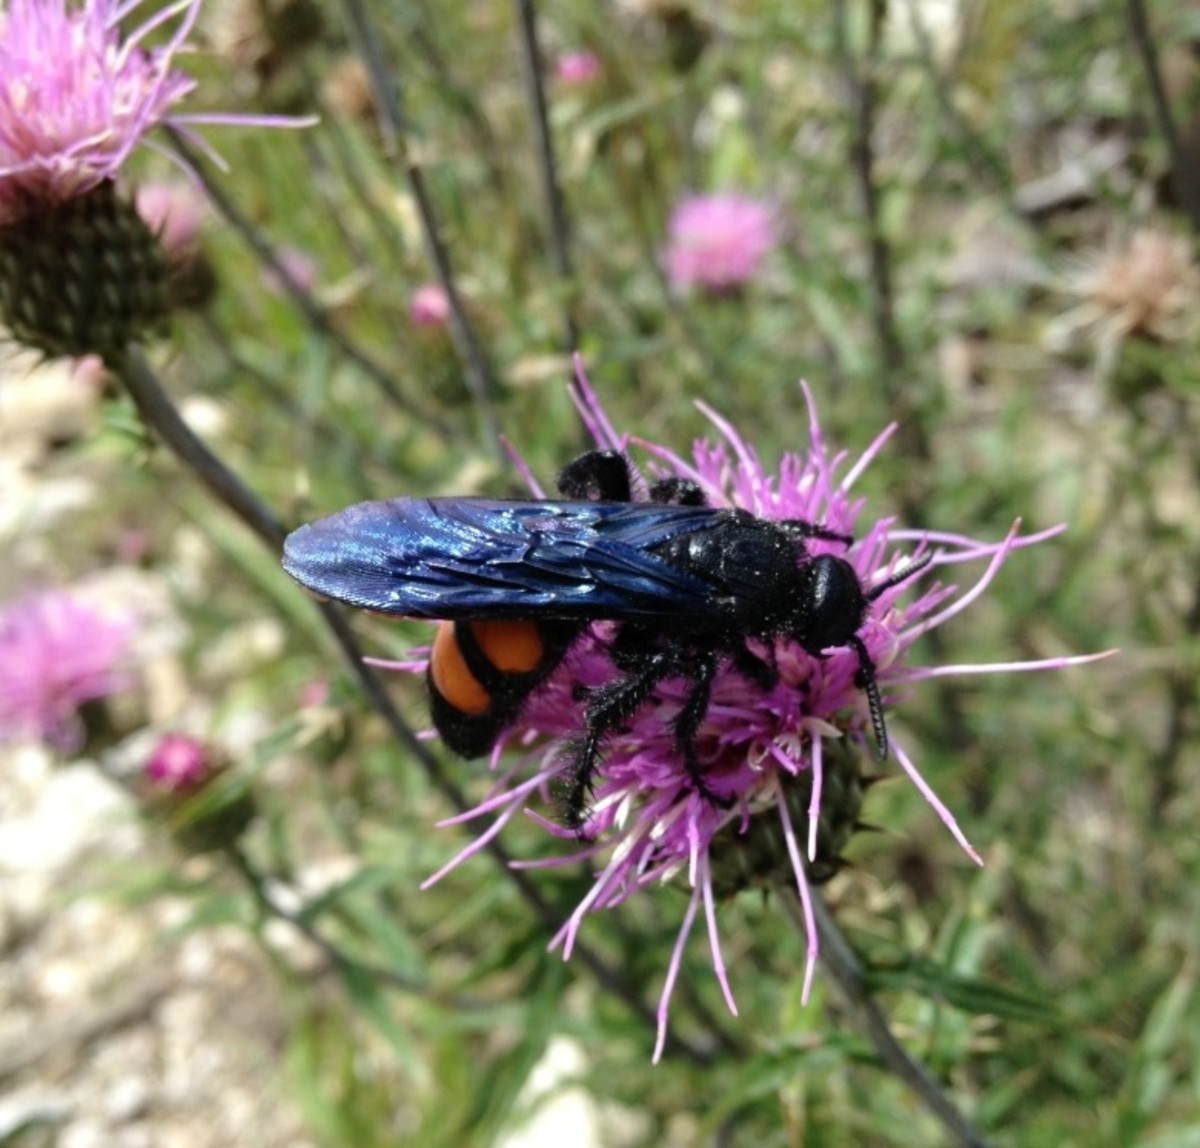 Close-up of Female Flower Wasp - note wider body and shorter antennae. (Photographed in Santa Catalina Mts, AZ)